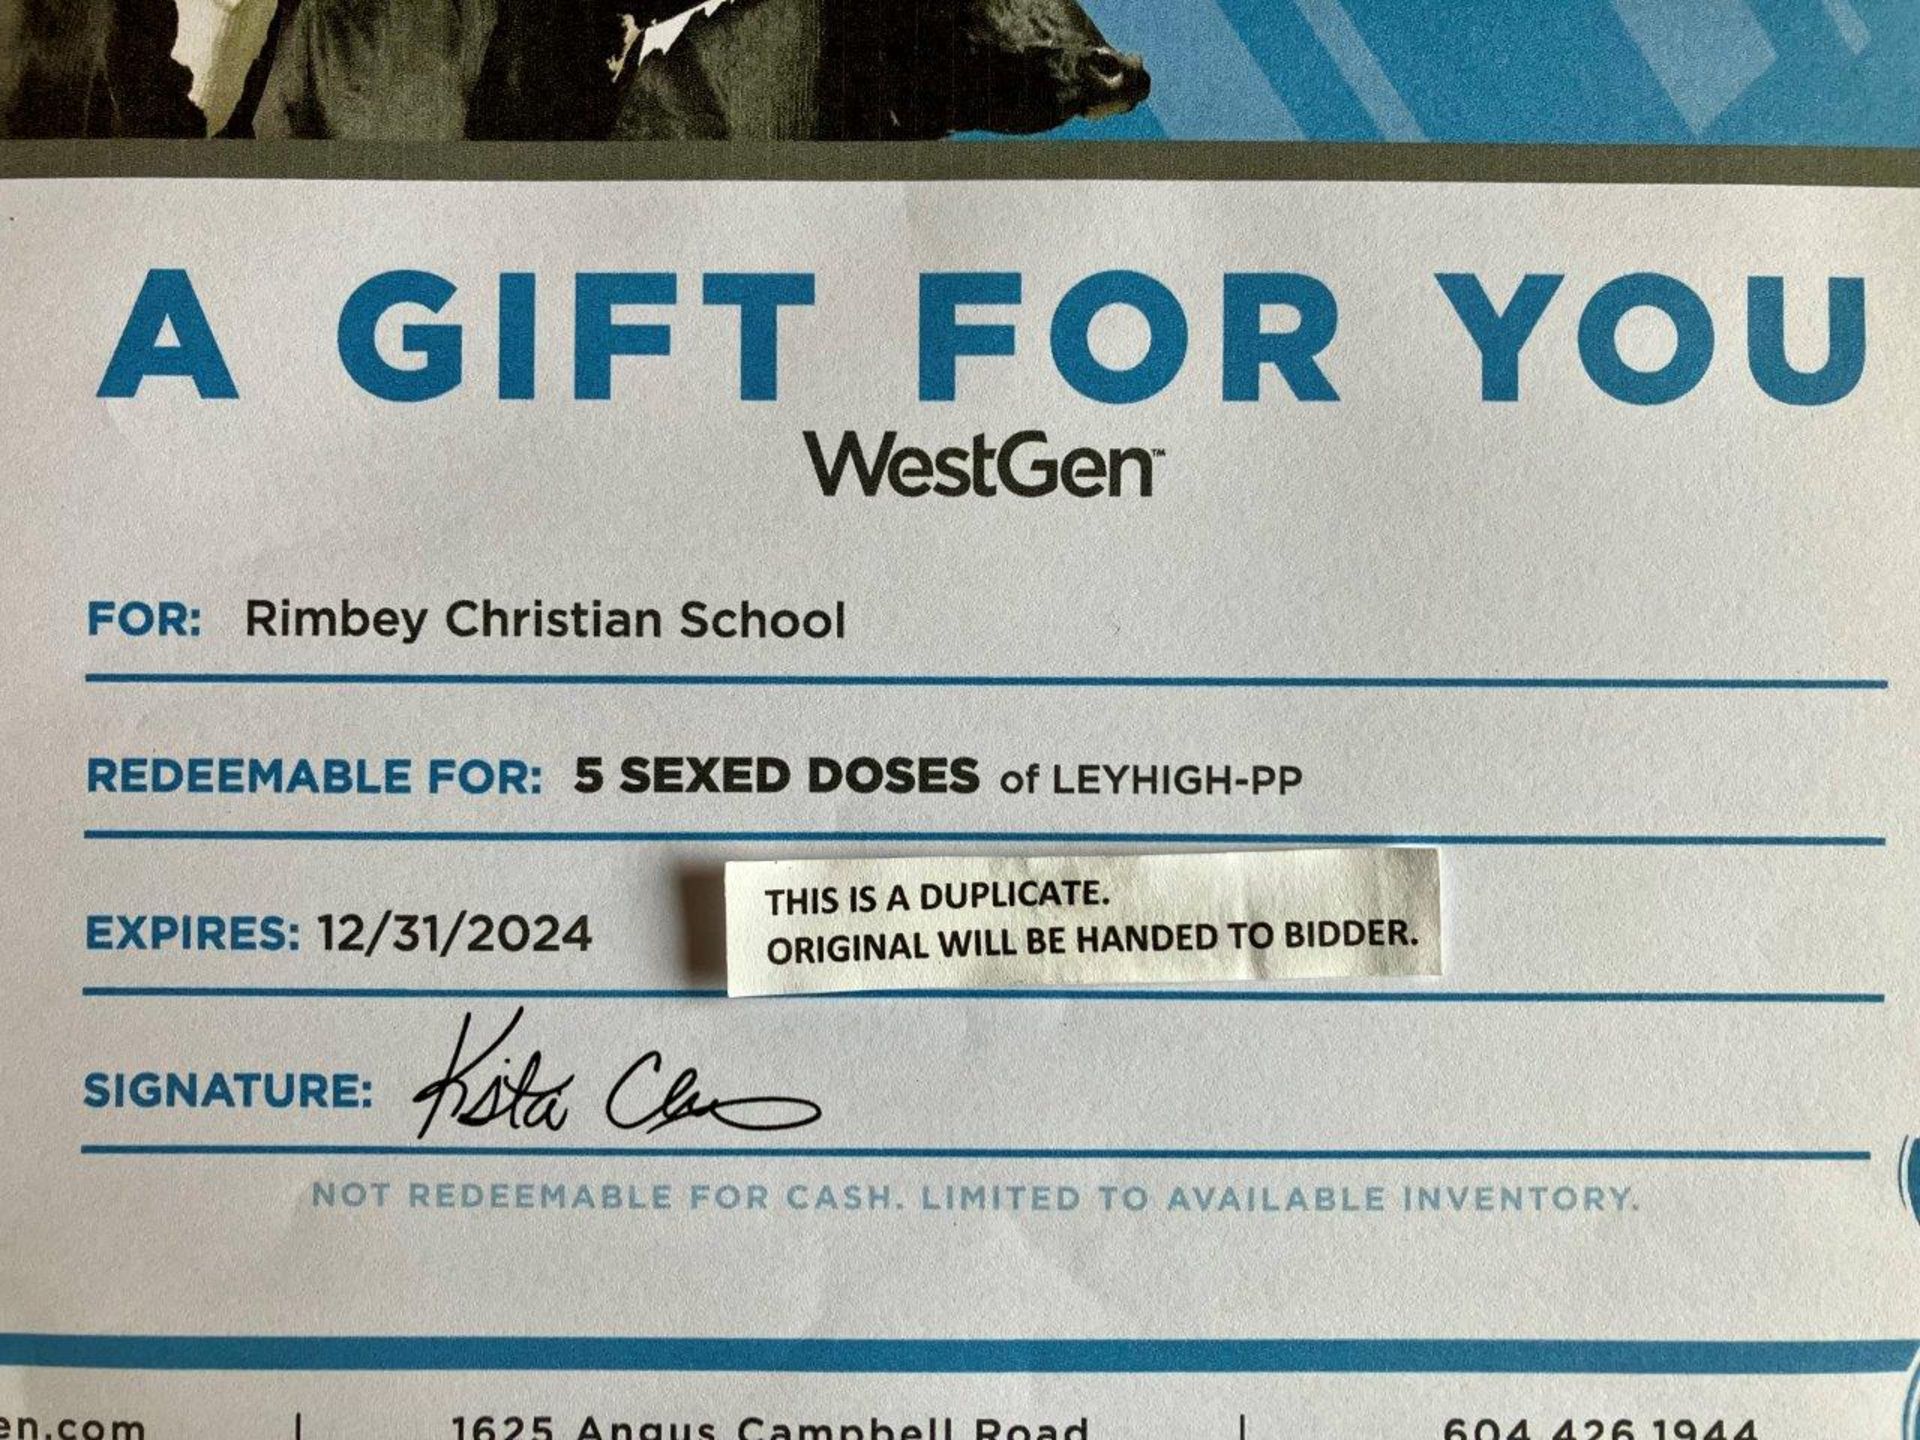 WESTGEN GIFT CERTIFICATE: 5 SEXED DOSES OF LEYHIGH-PP - Image 2 of 2